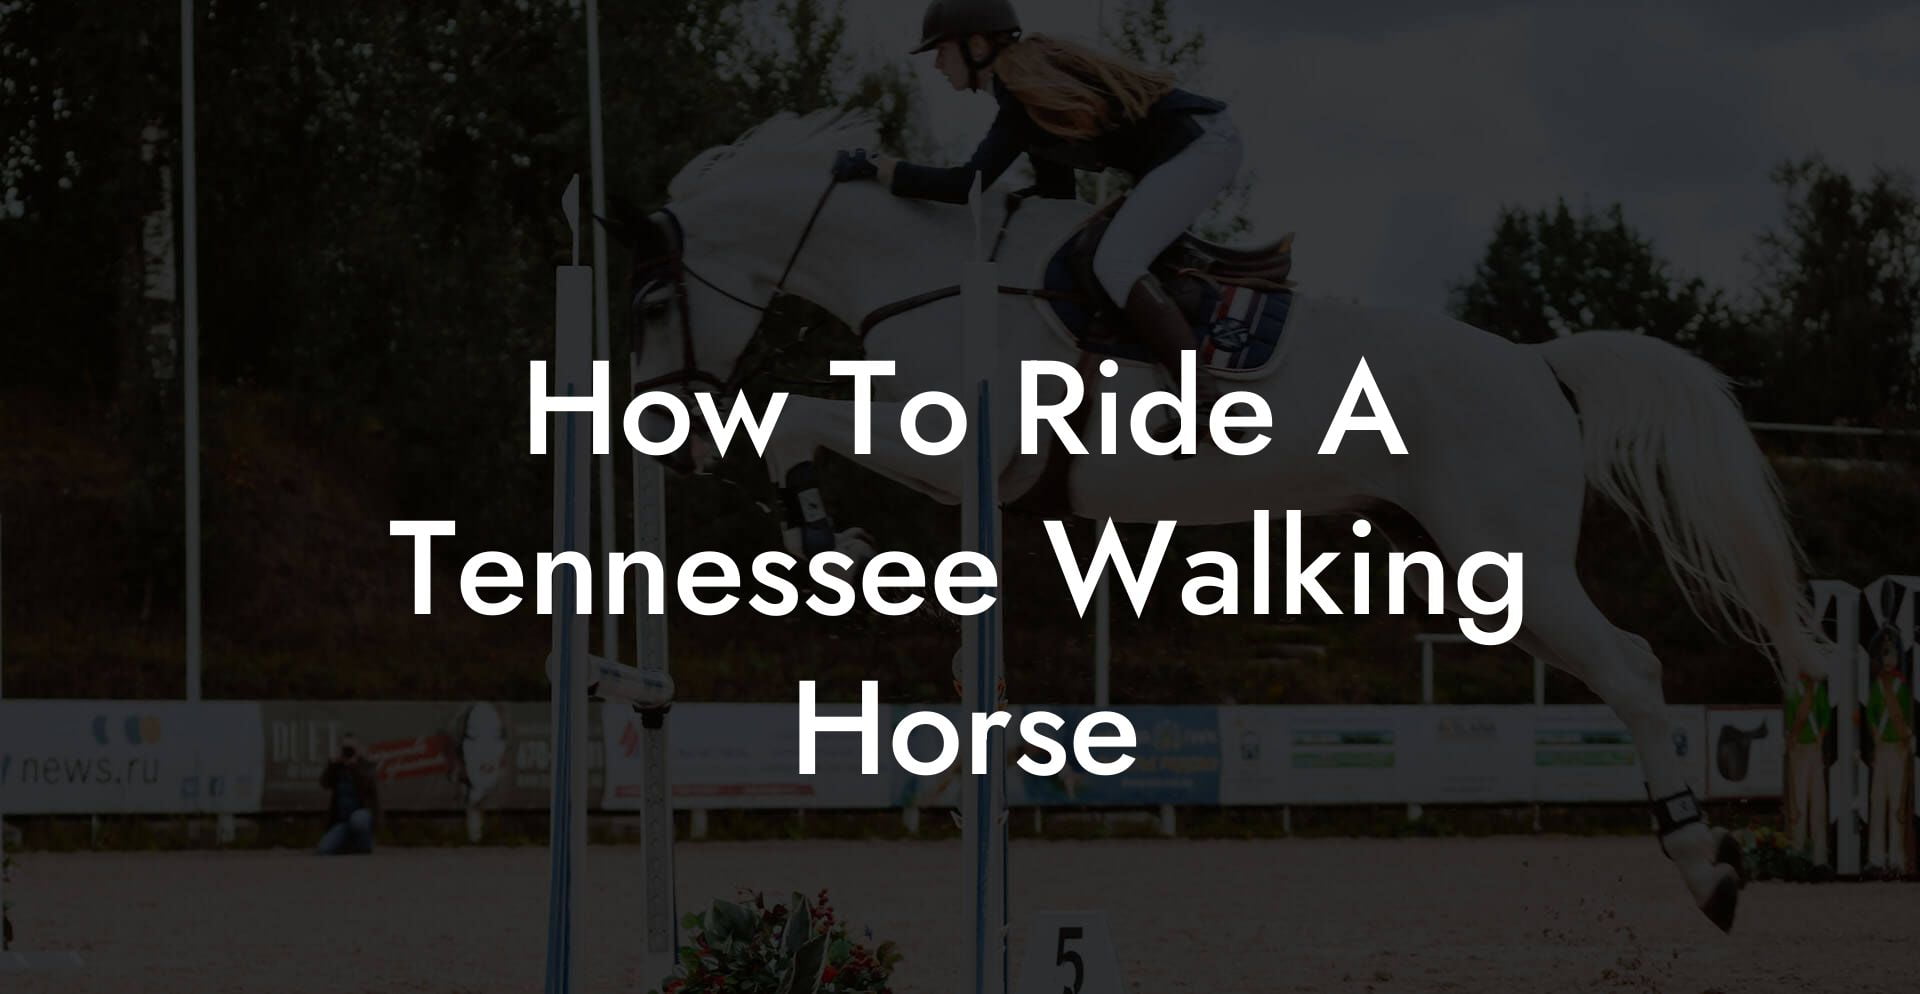 How To Ride A Tennessee Walking Horse - How To Own a Horse